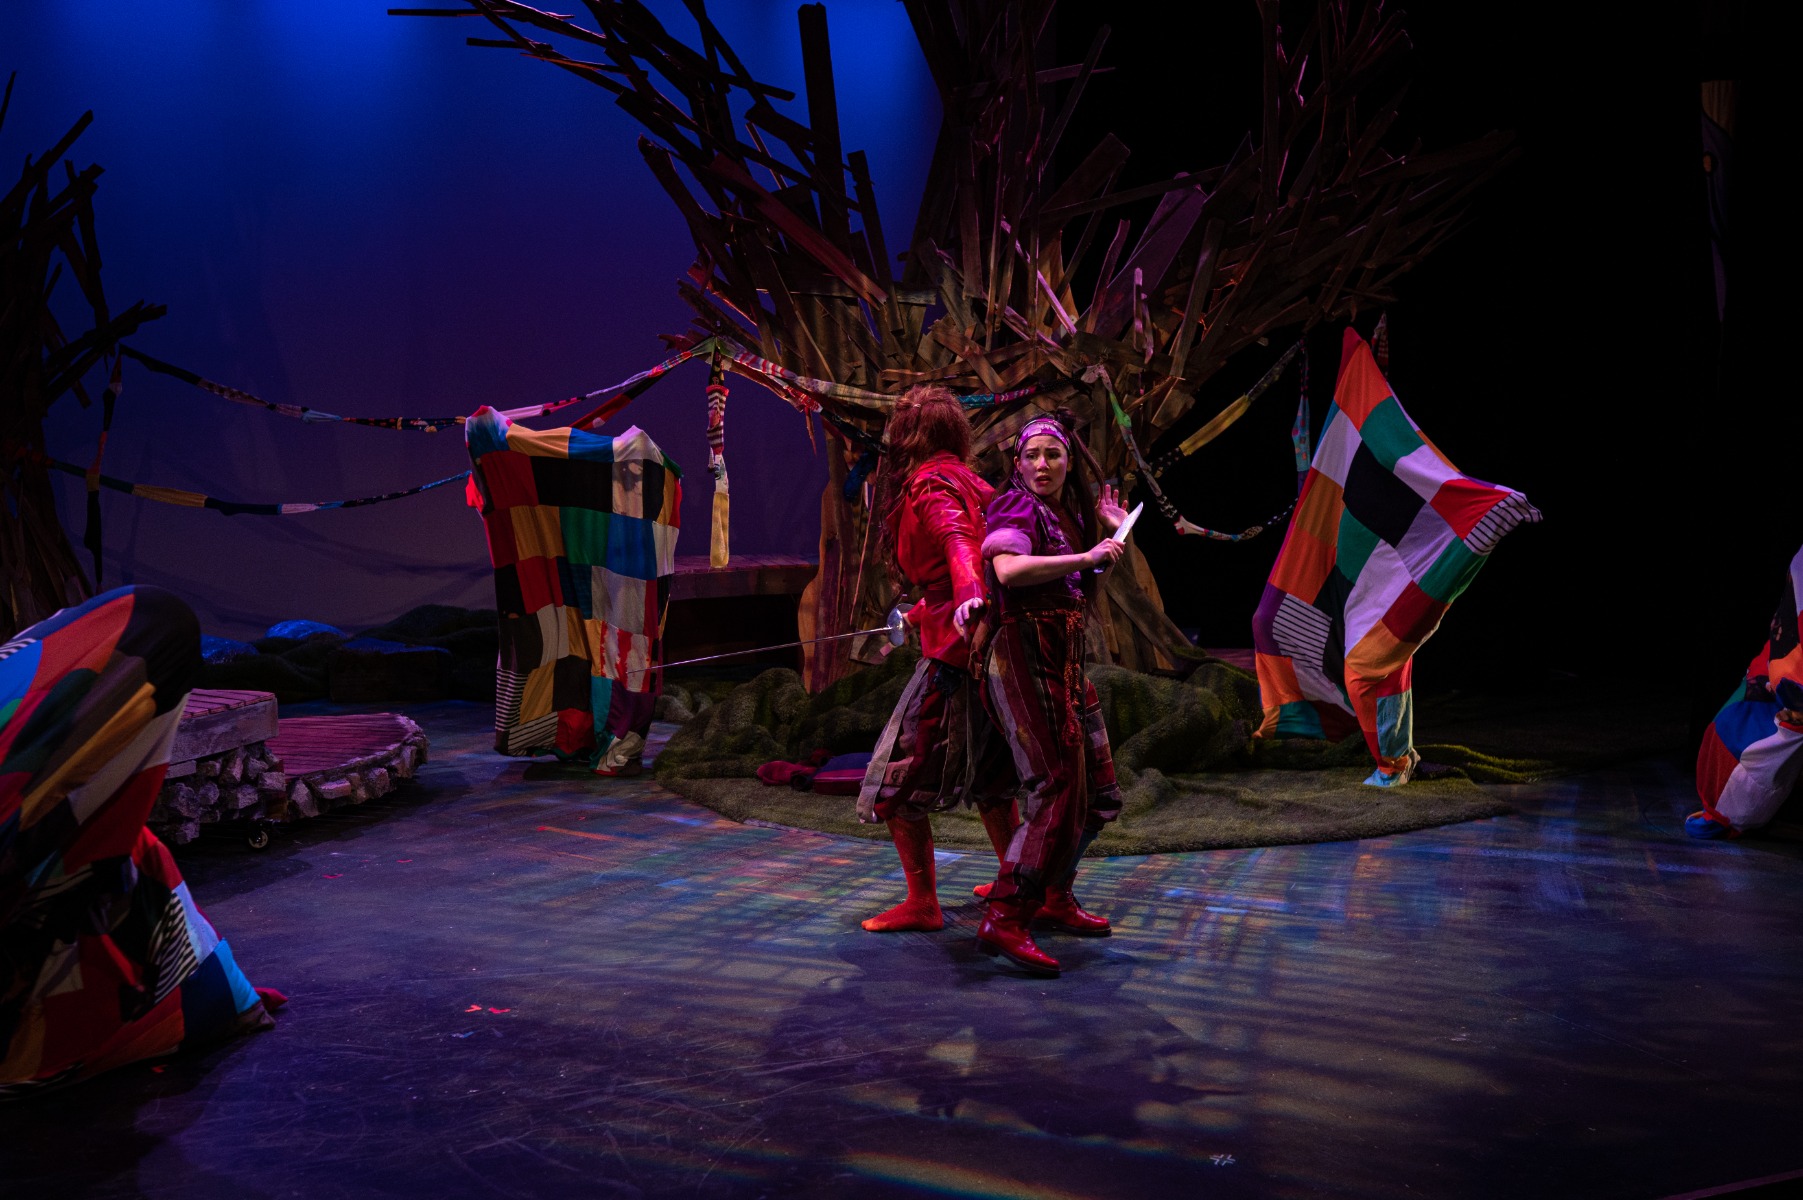 Tooth & Tail by Elizabeth A.M. Keel at Mildred's Umbrella Theater Company, Houston, TX, 2023. Photo: Tasha Gorel.